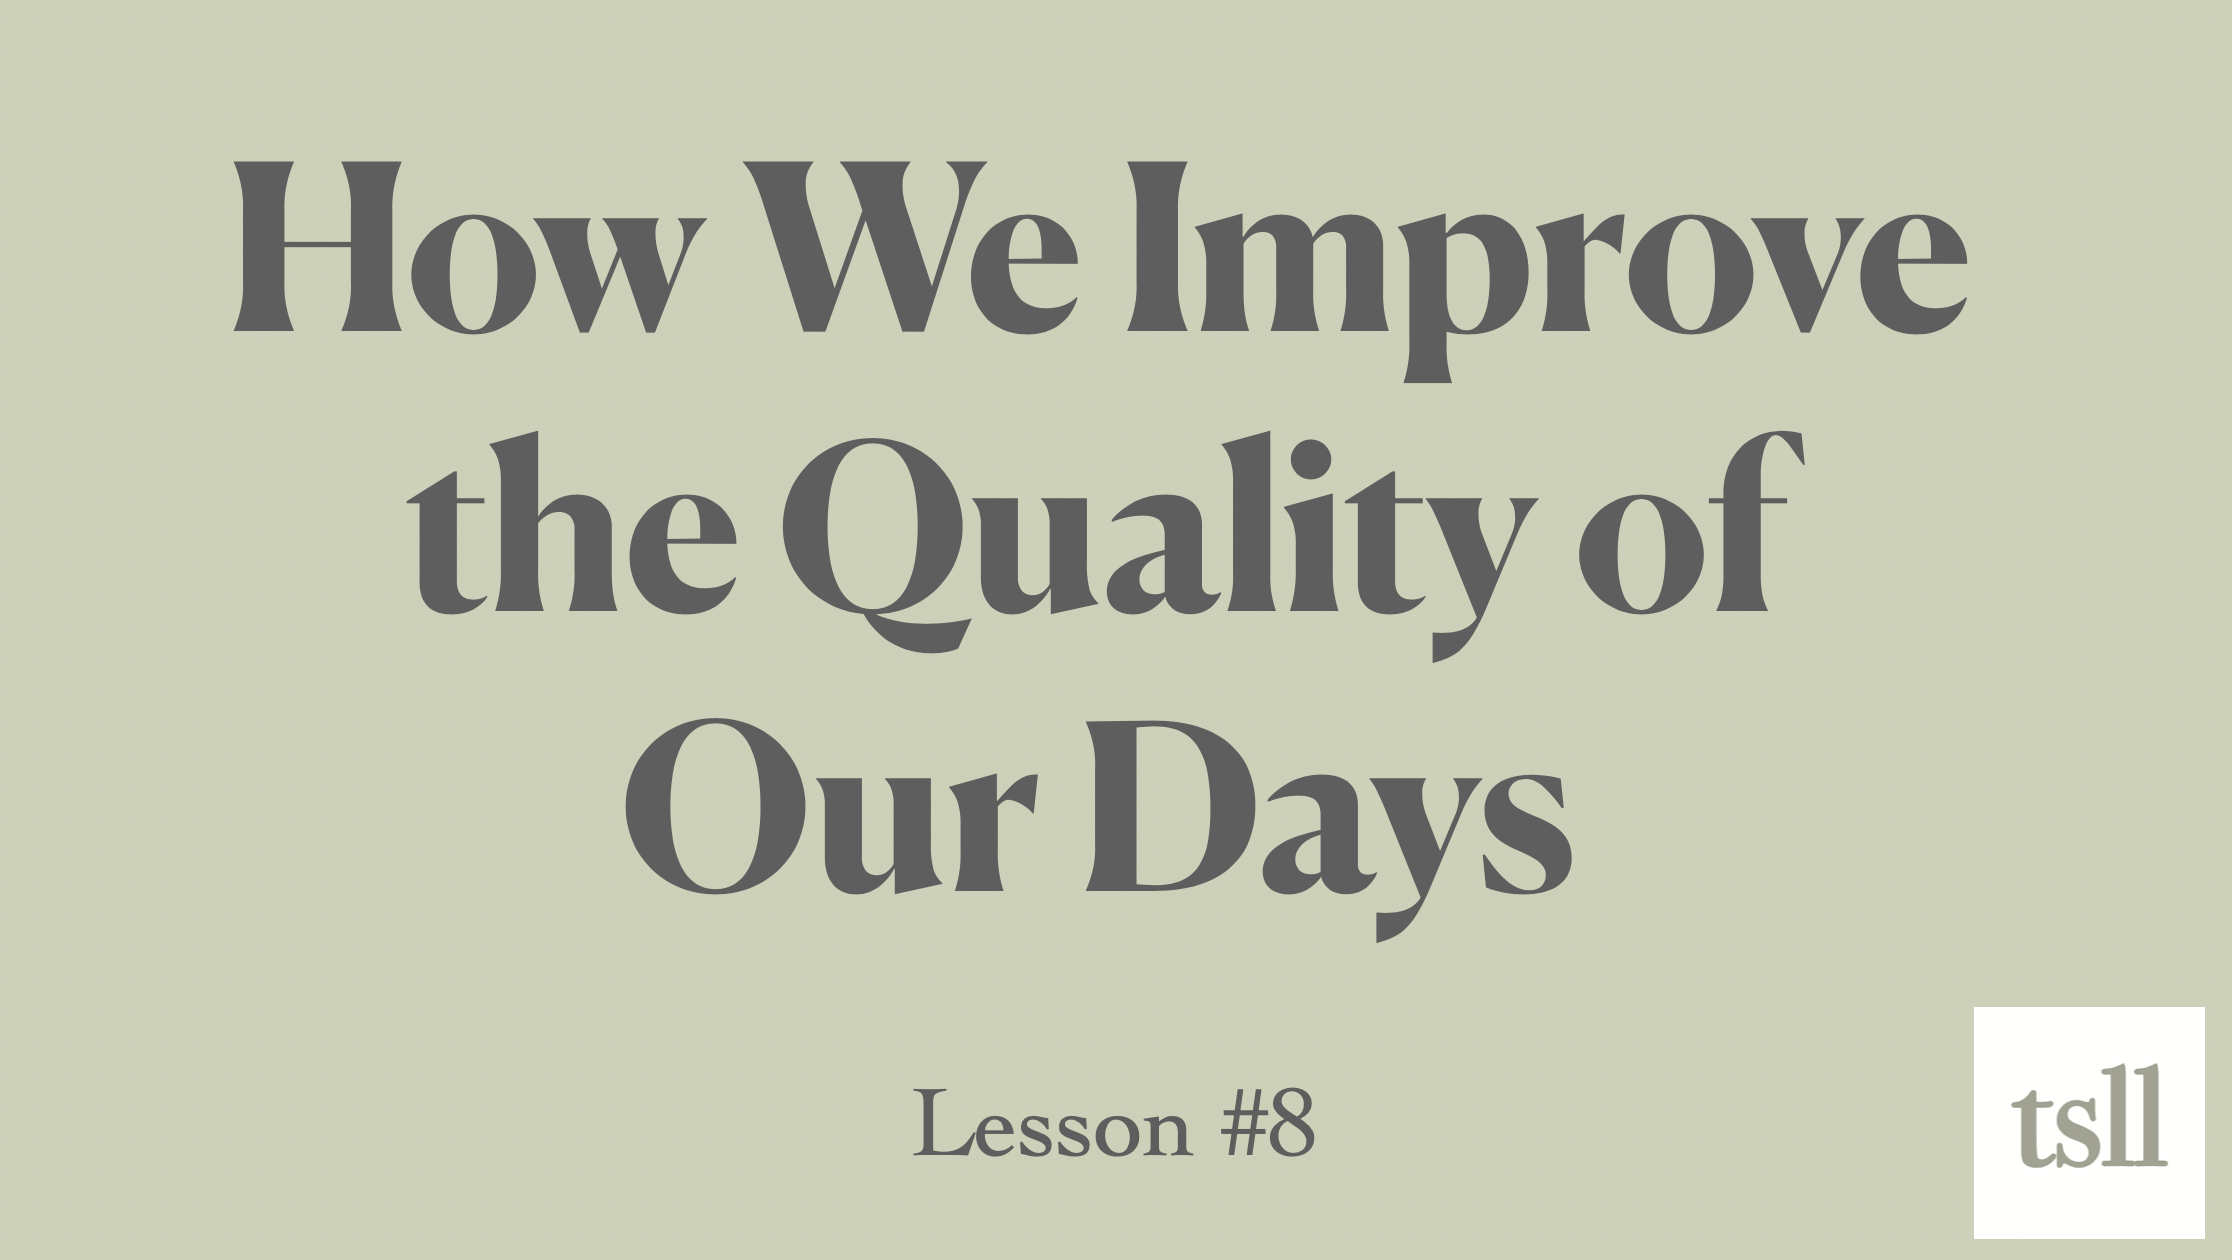 Part 2: How We Improve the Quality of Our Days, (10:04)